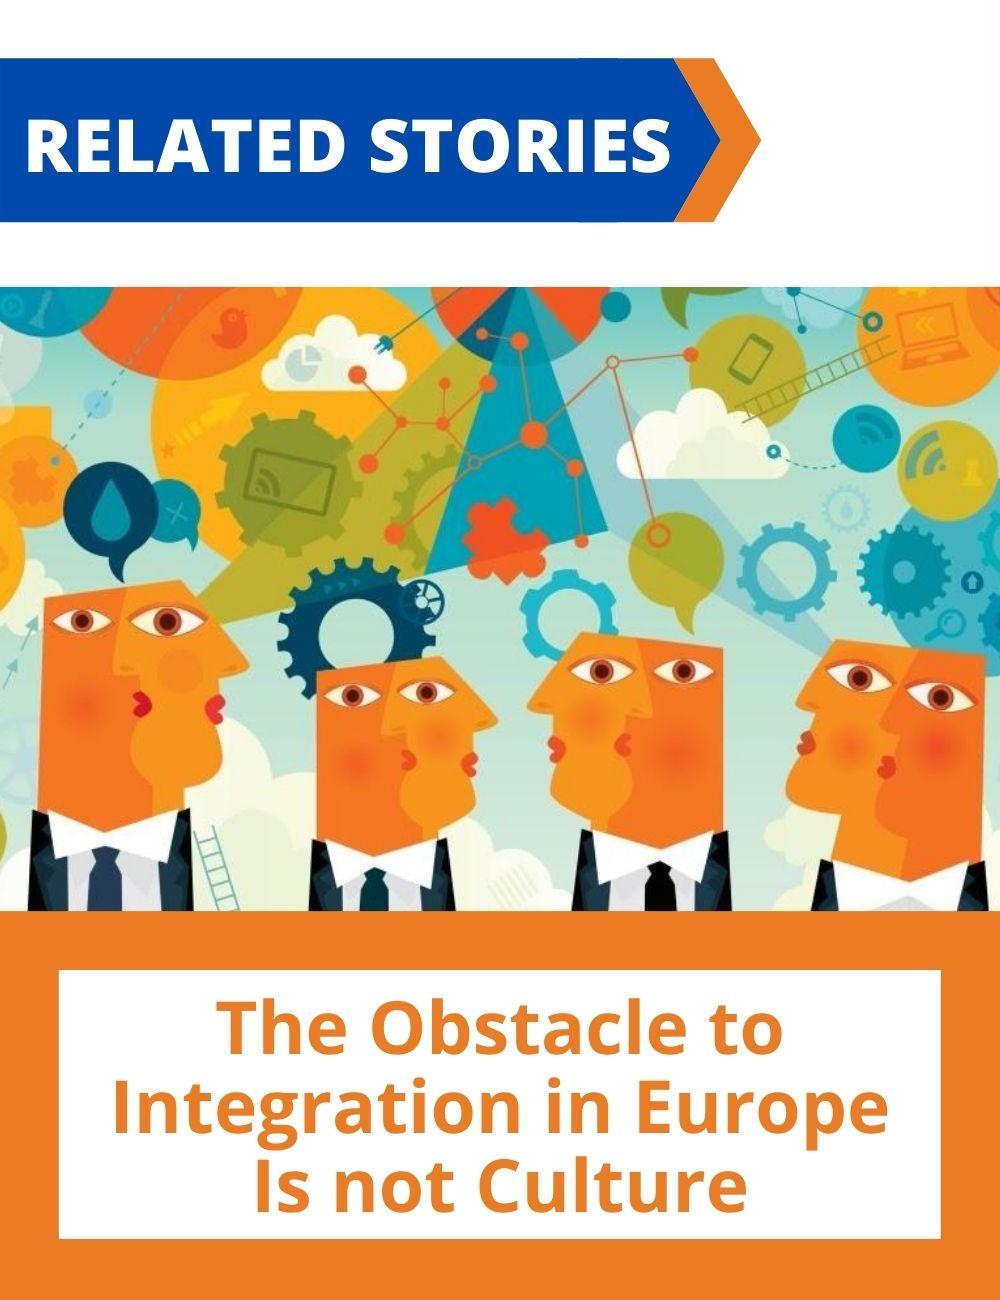 Link to related stories. Image: four people illustrated in a distinctive style. Story headline: The Obstacle to Integration in Europe Is not Culture 